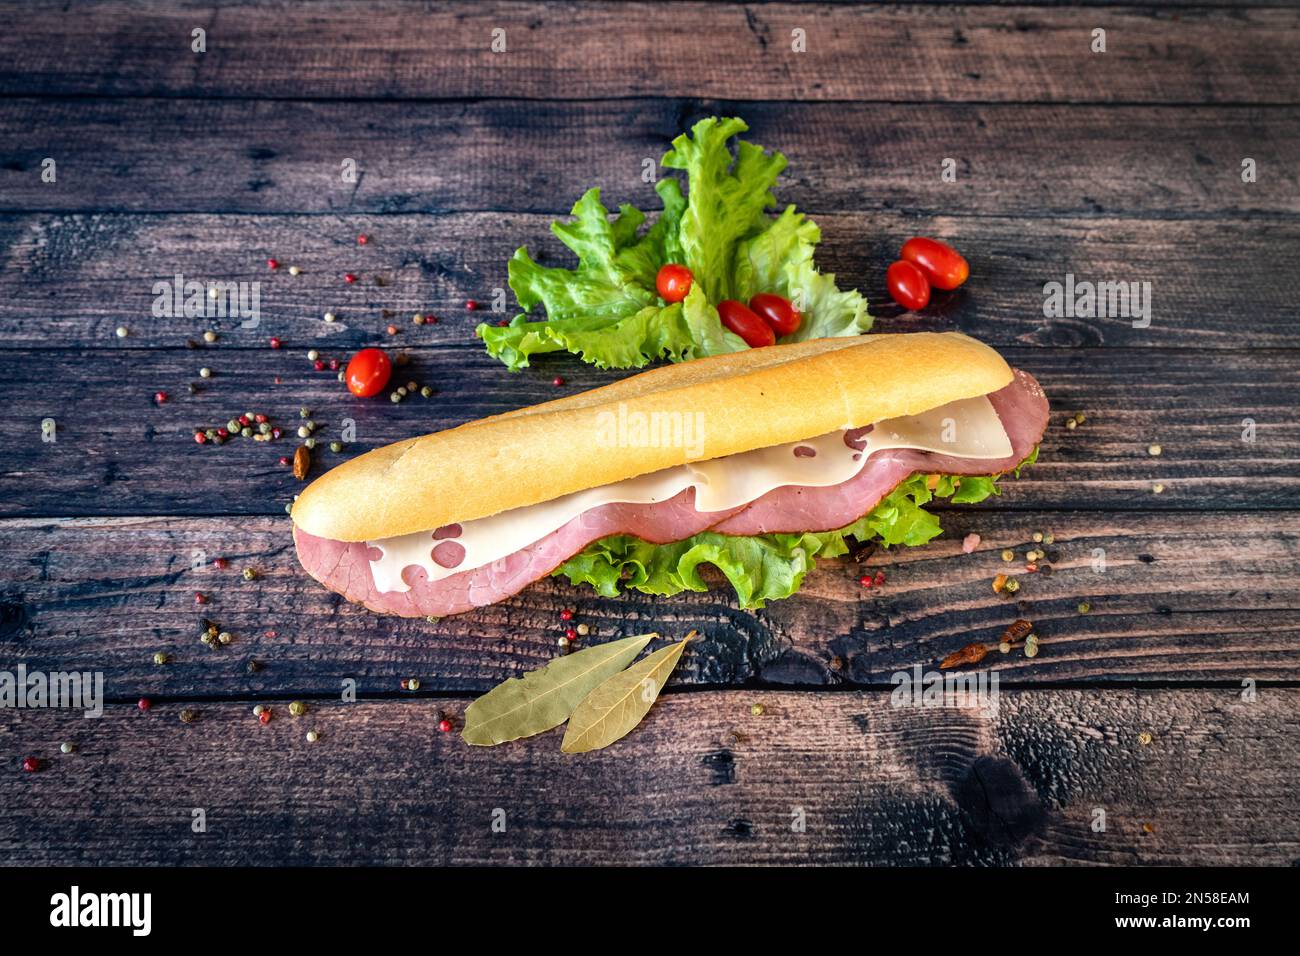 goot meat and fast food. Sandwich on a wooden background Stock Photo